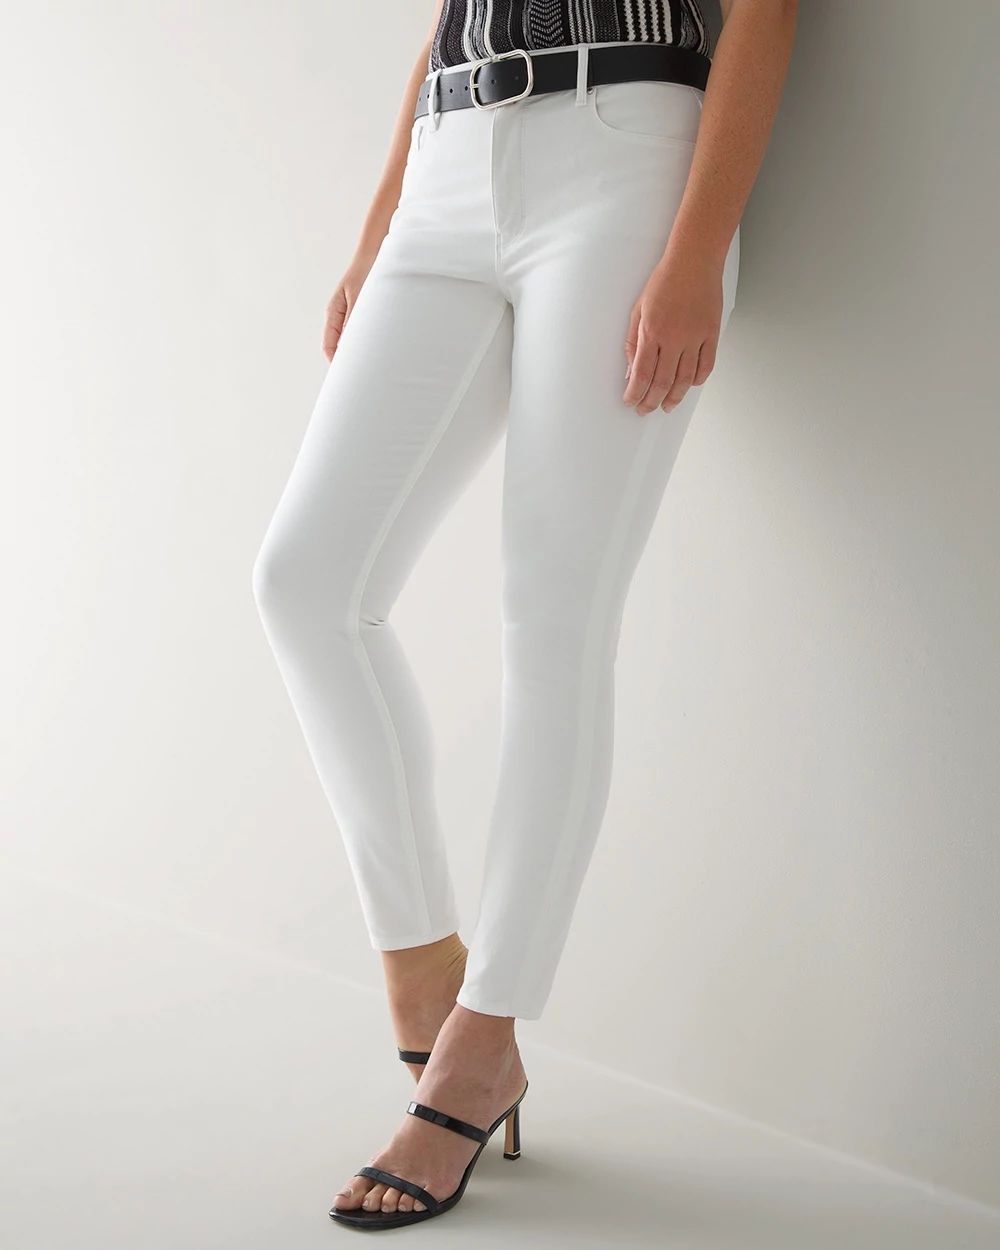 High-Rise Sculpt Skinny Jeans click to view larger image.